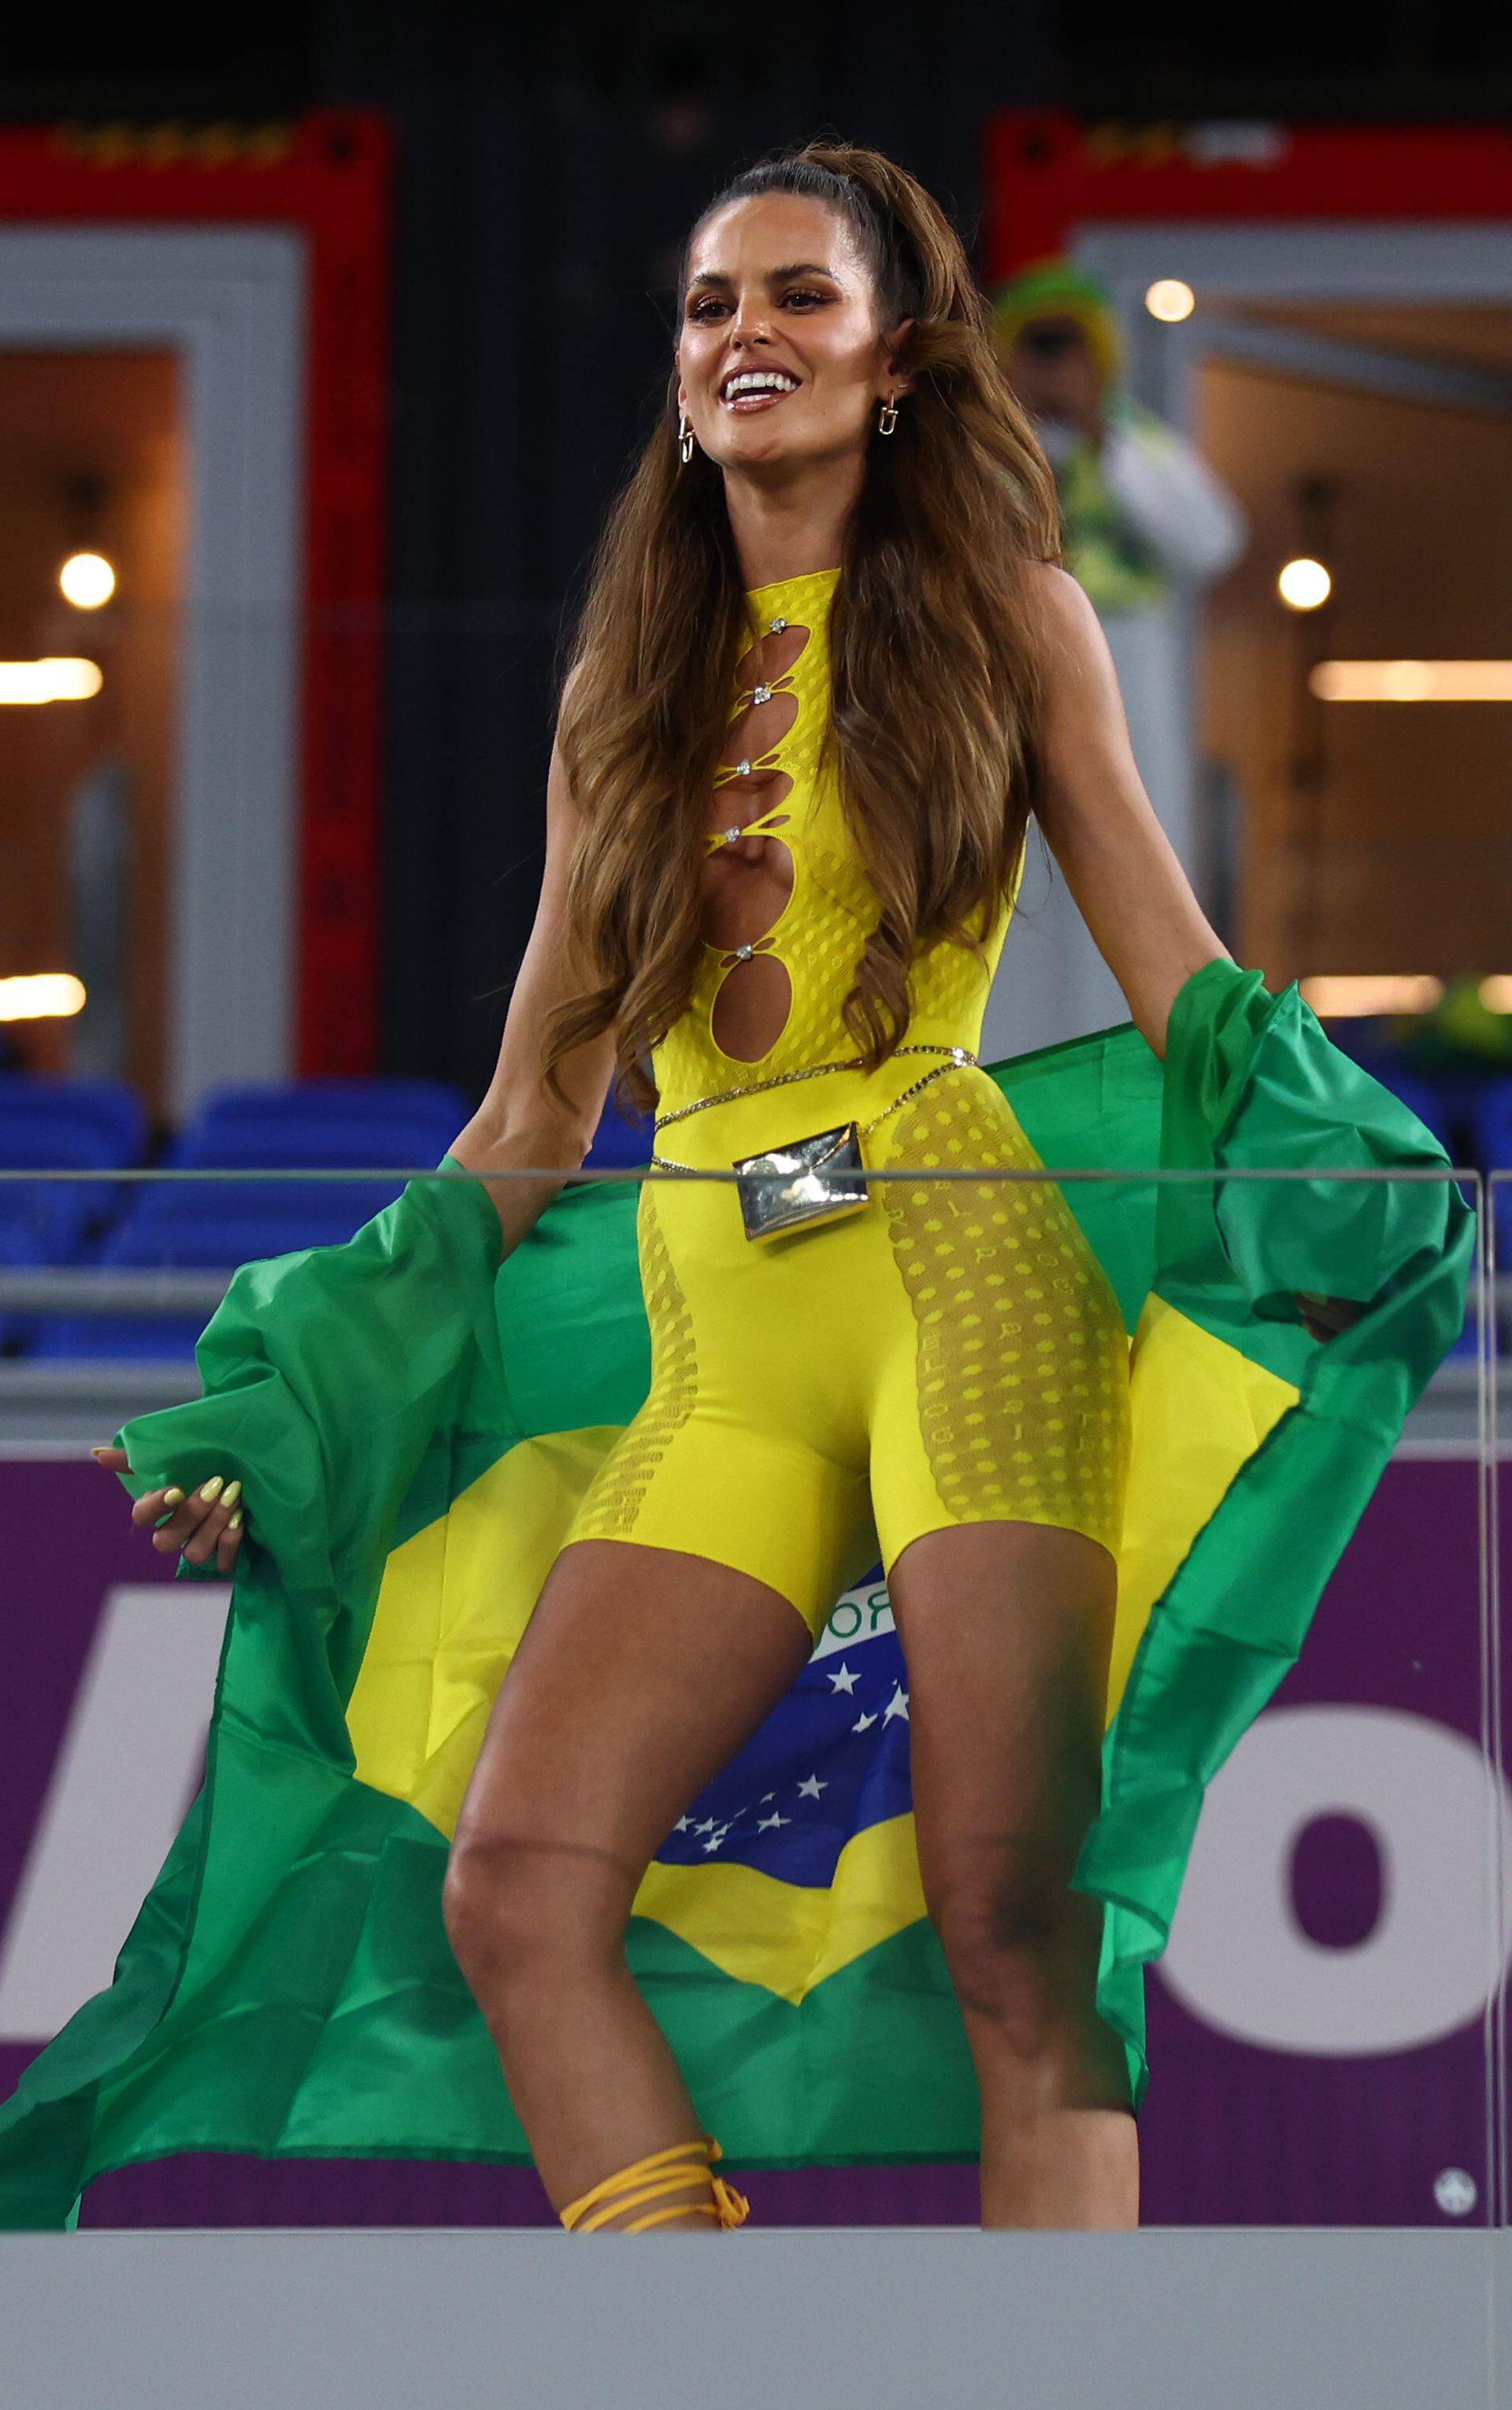 Doha, Qatar, 5th December 2022.  Brazilian supermodel Izabel Goulart partner of German player Kevin Trapp during the FIFA World Cup 2022 match at Stadium 974, Doha. Picture credit should read: David Klein / Sportimage